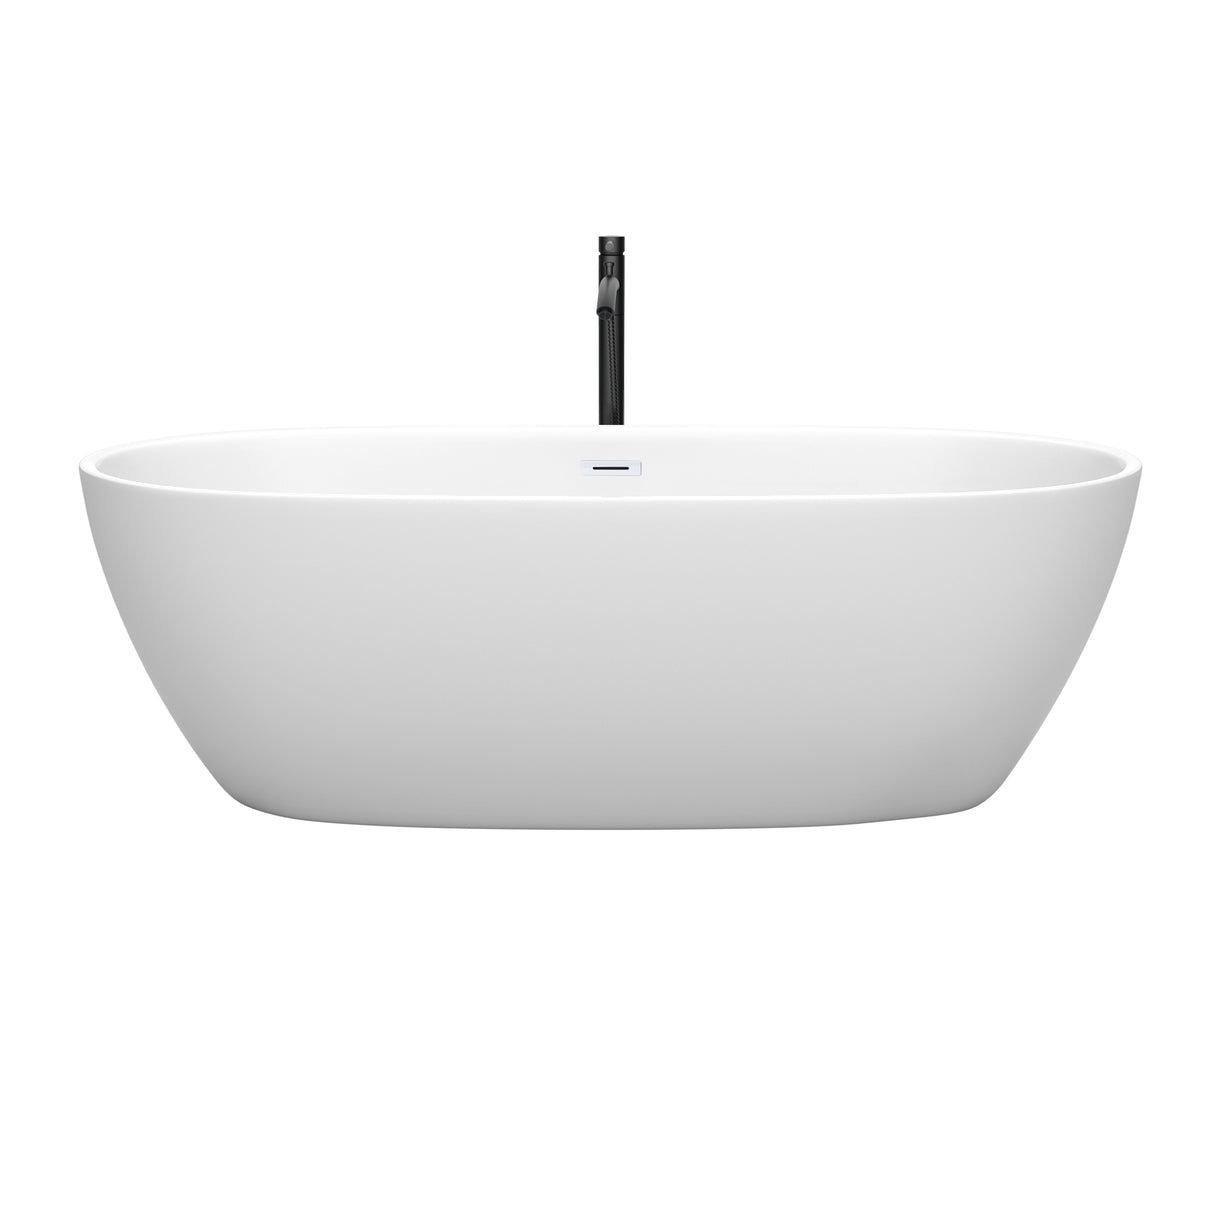 Juno 71 Inch Freestanding Bathtub in Matte White with Shiny White Trim and Floor Mounted Faucet in Matte Black